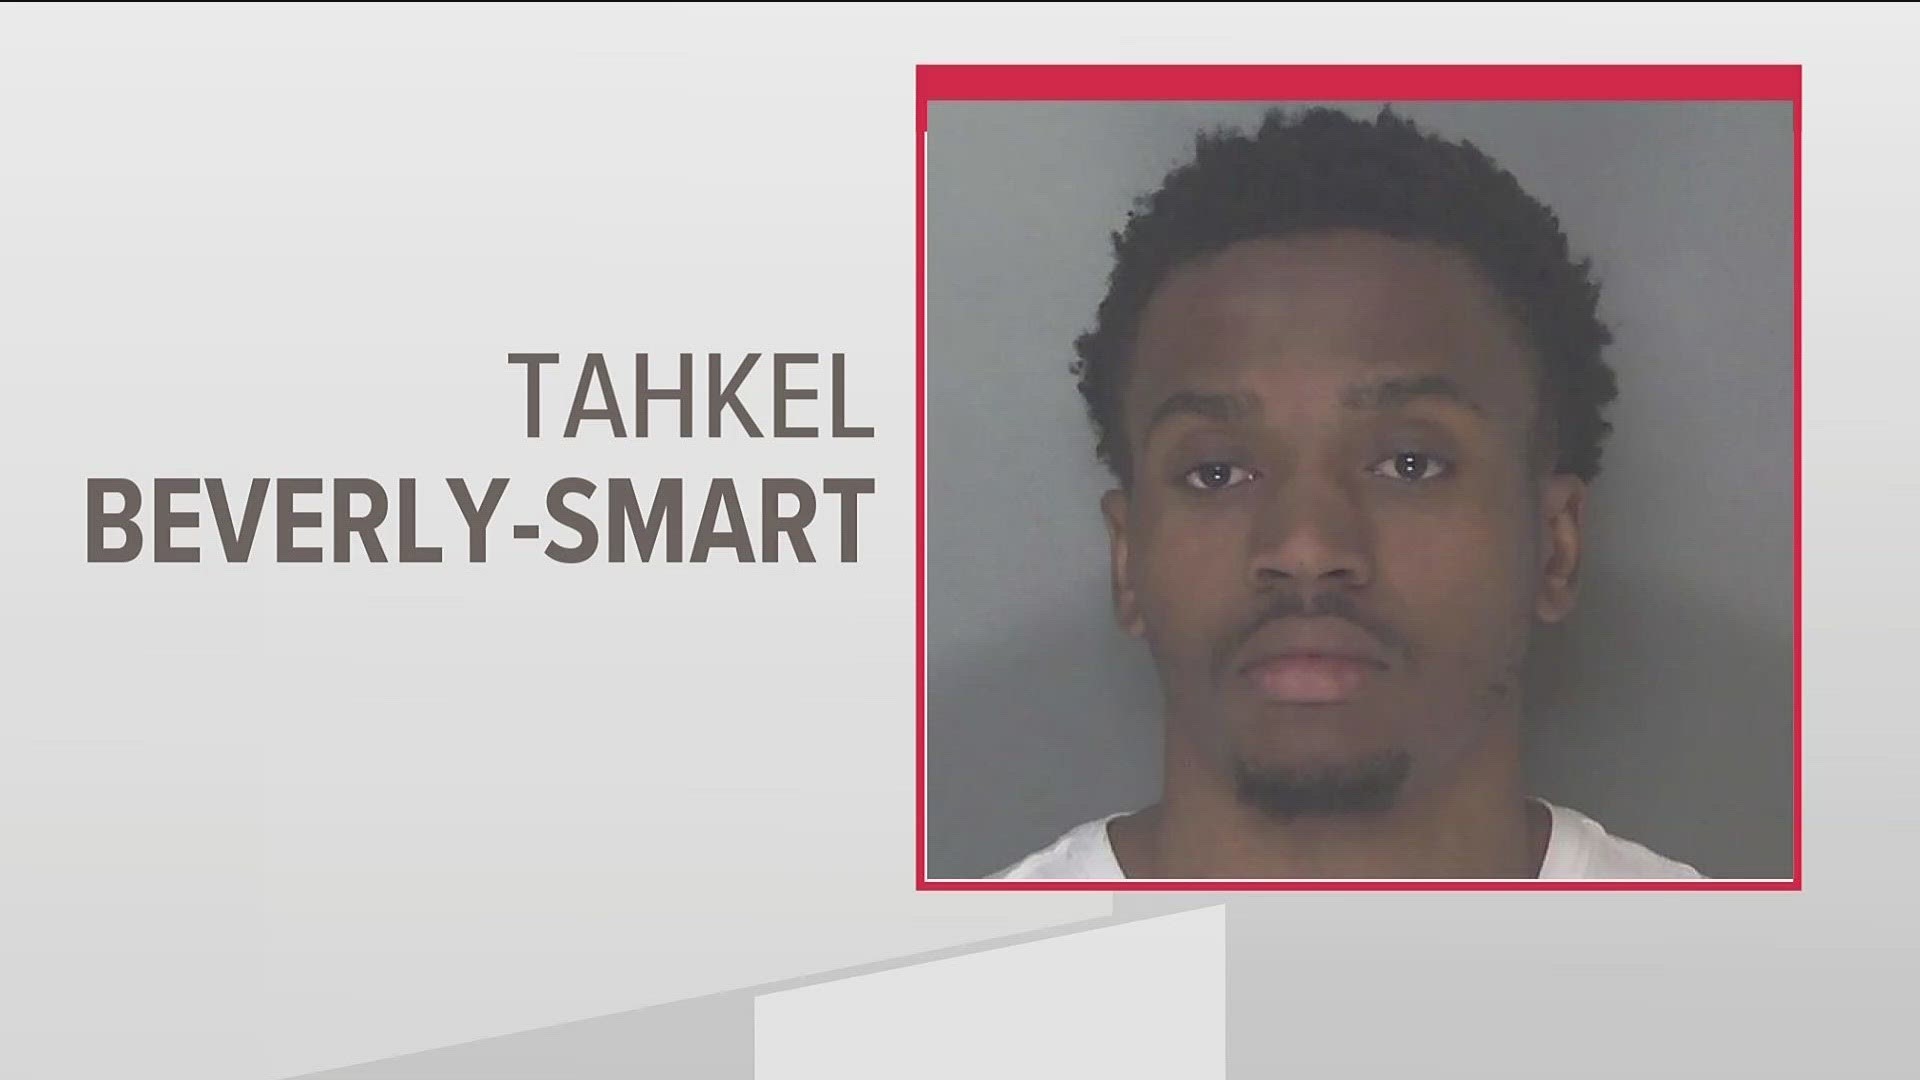 In just the span of several months, Smart has been charged in the murders of three children.